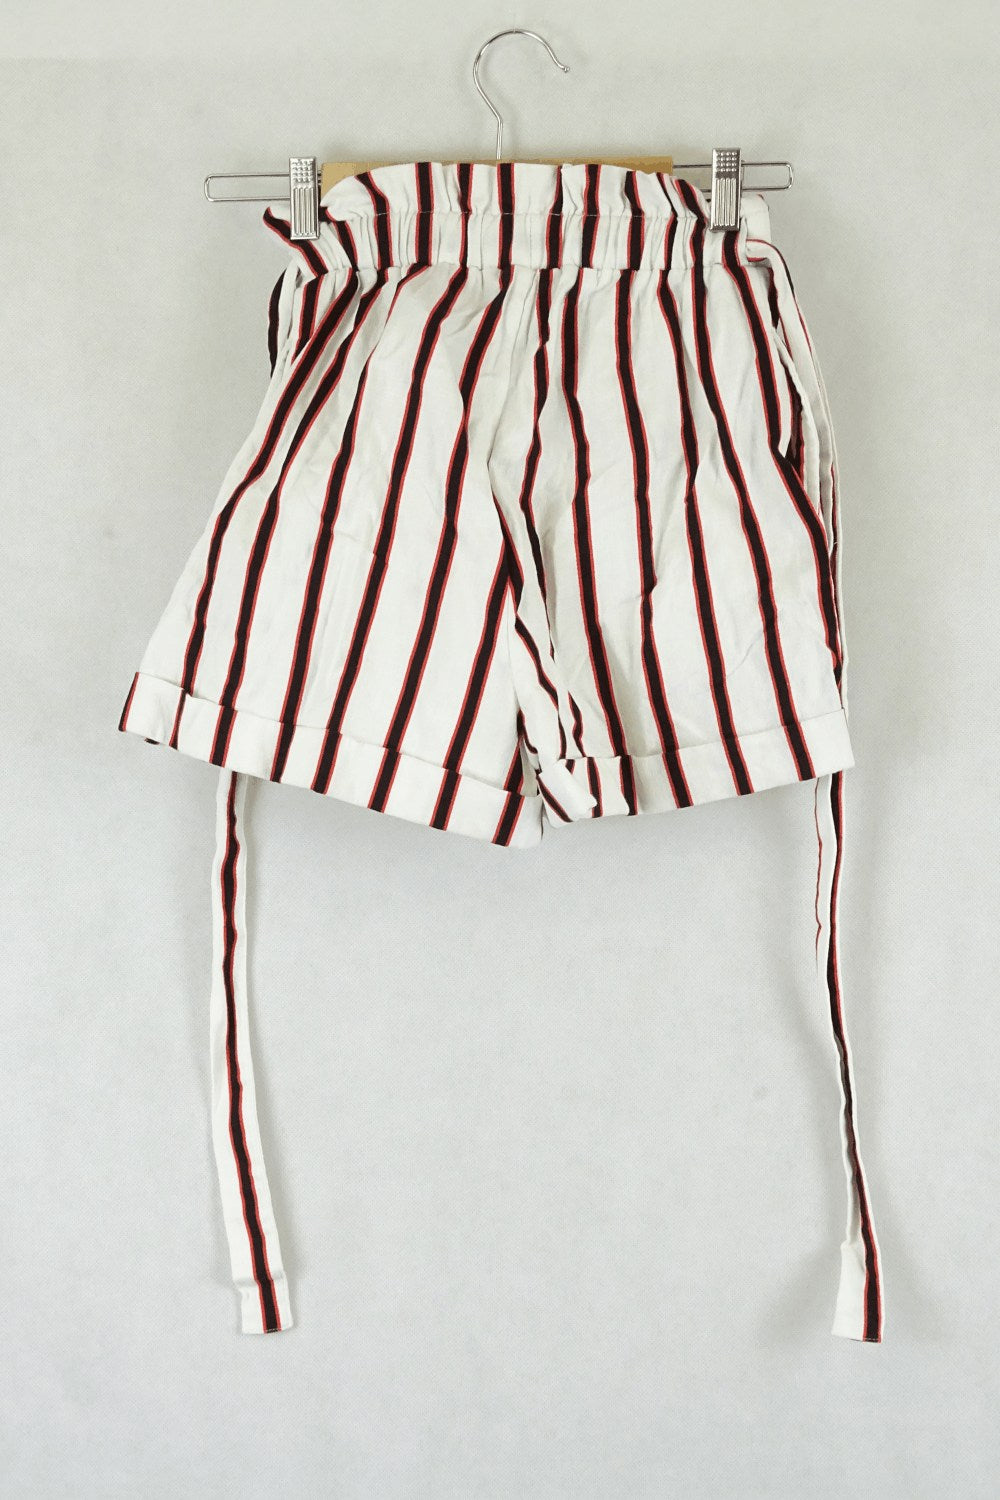 Bardot Striped Red,Black And White Shorts 6